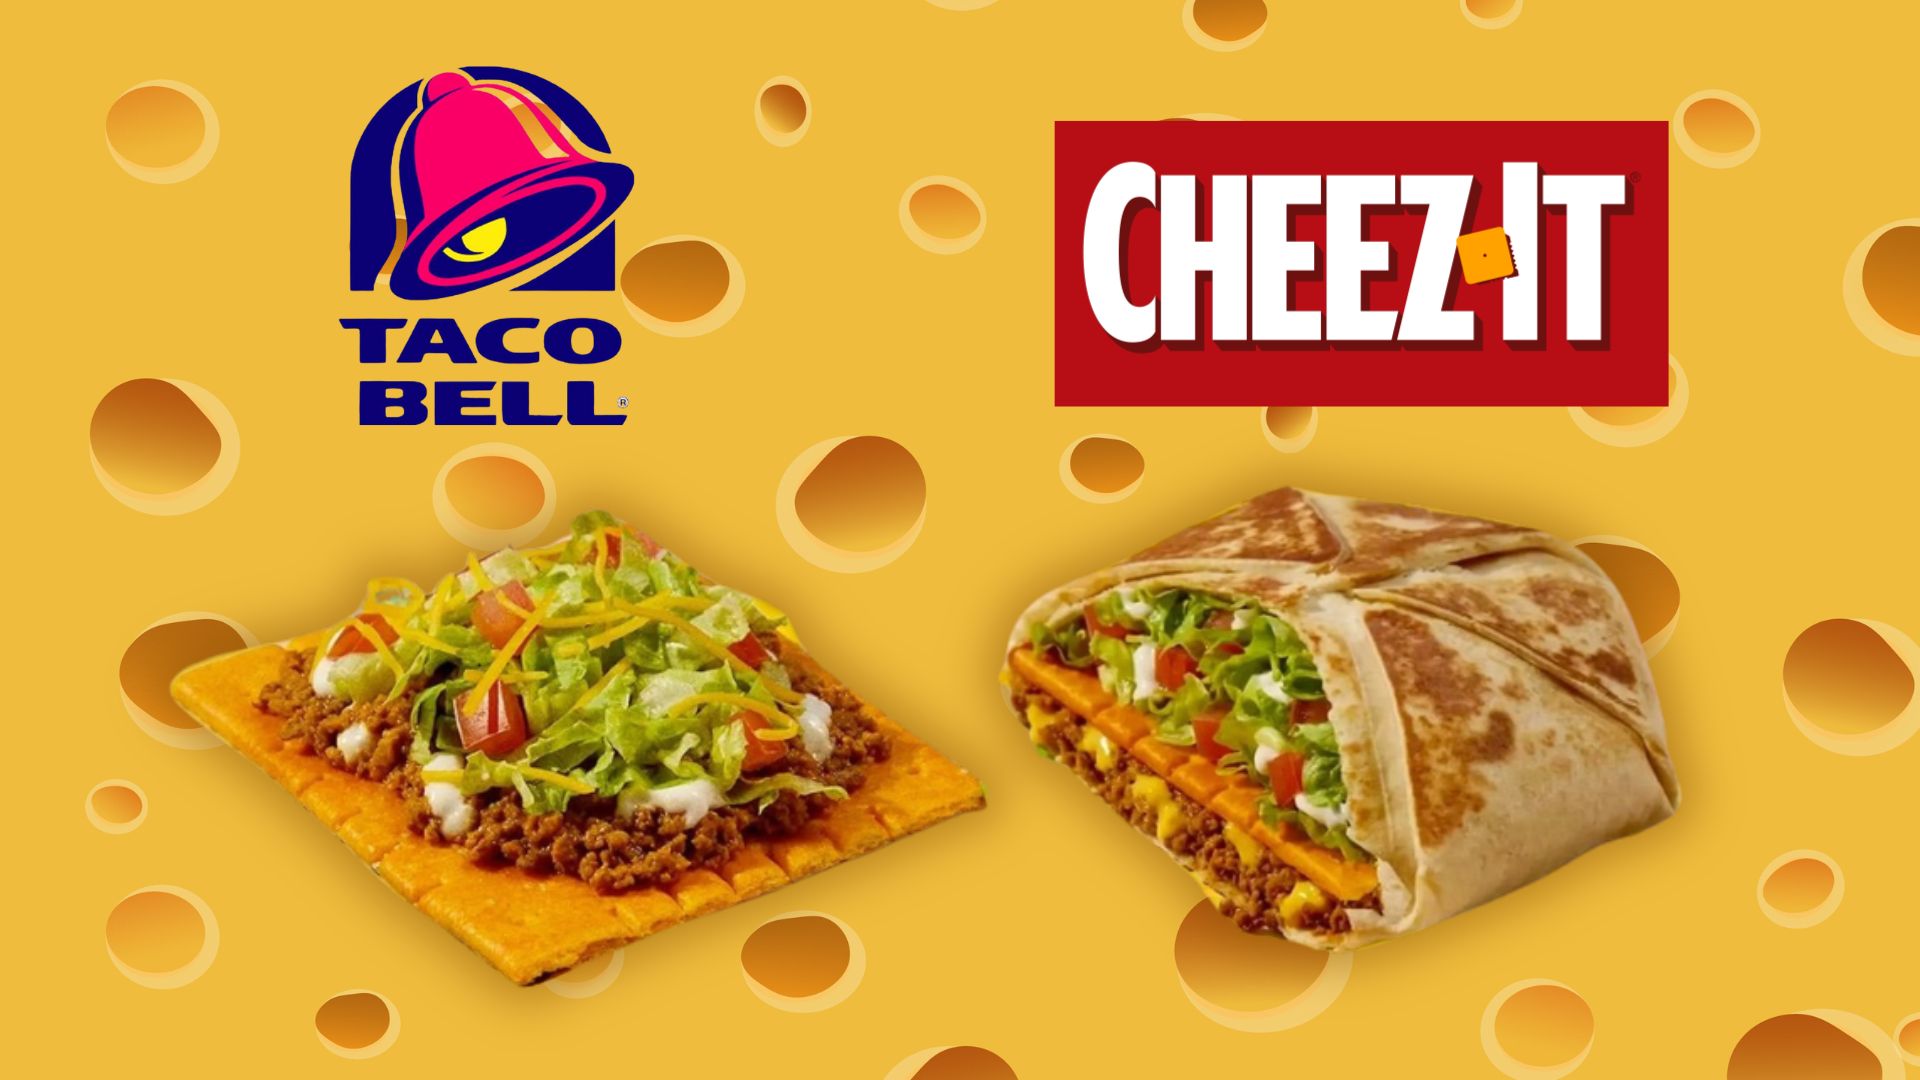 Taco Bell's Latest Creation: Giant Cheez-It Tacos Set to Take Over This Summer